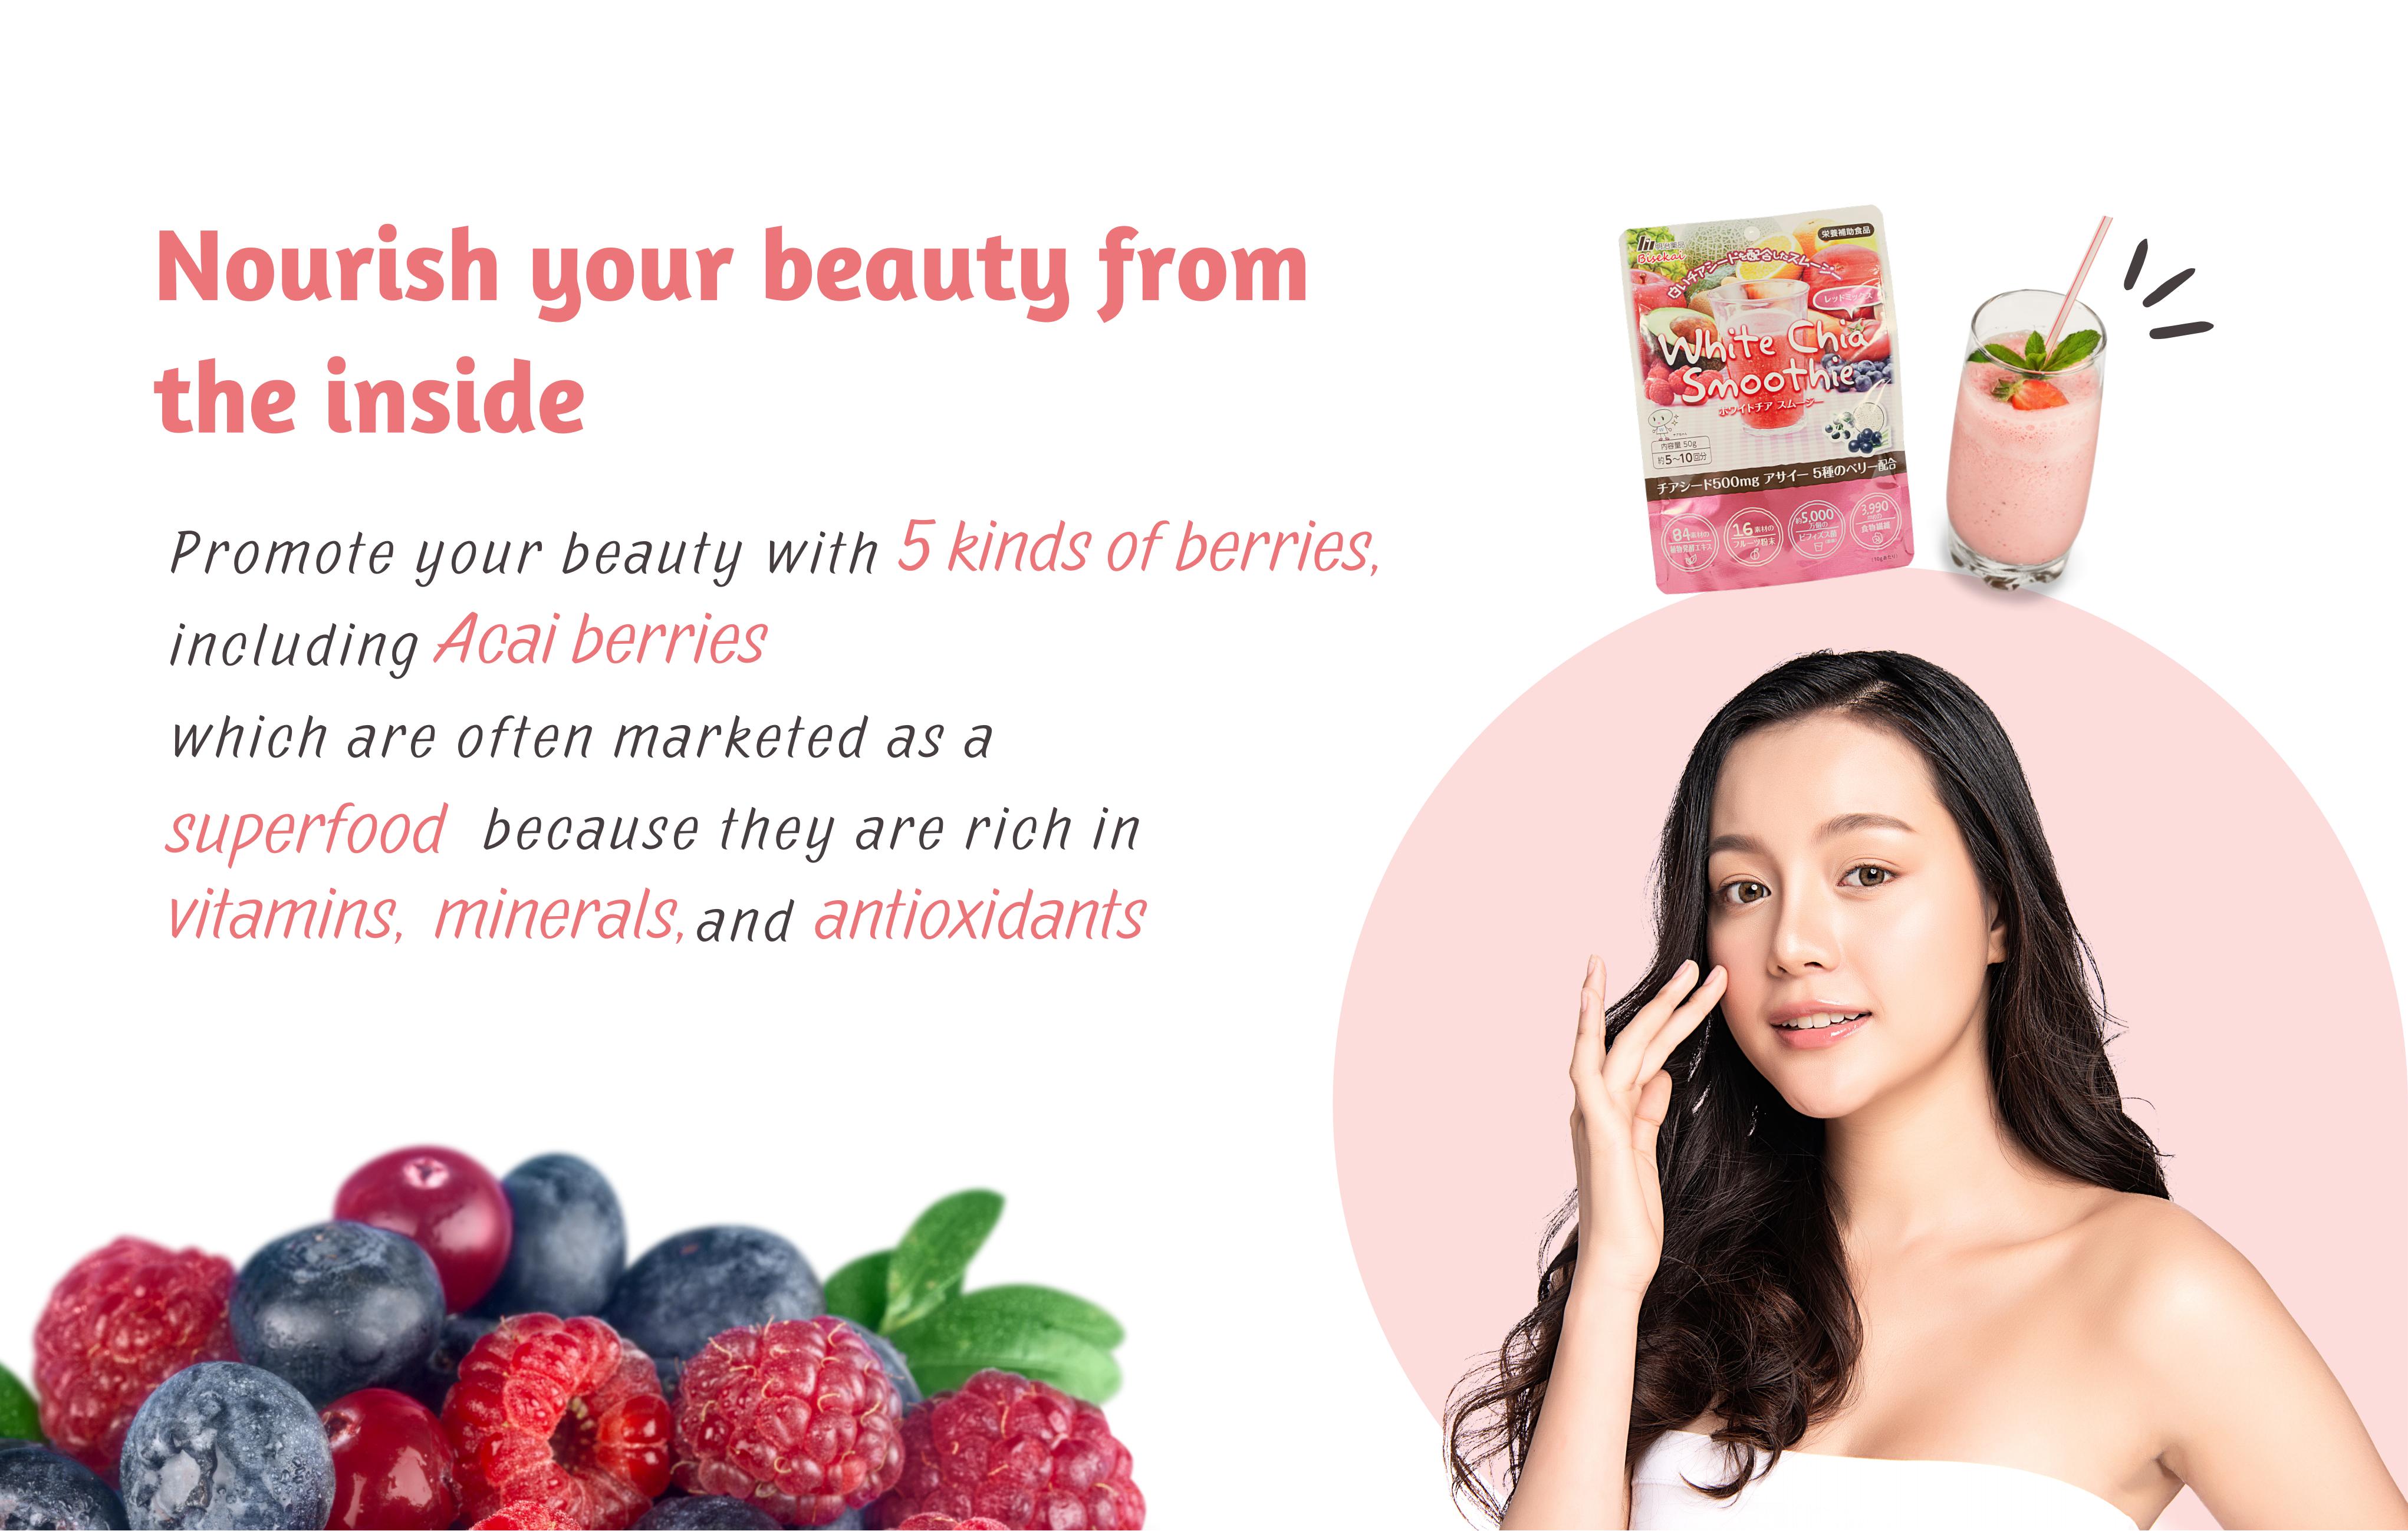 Nourish your beauty from the inside